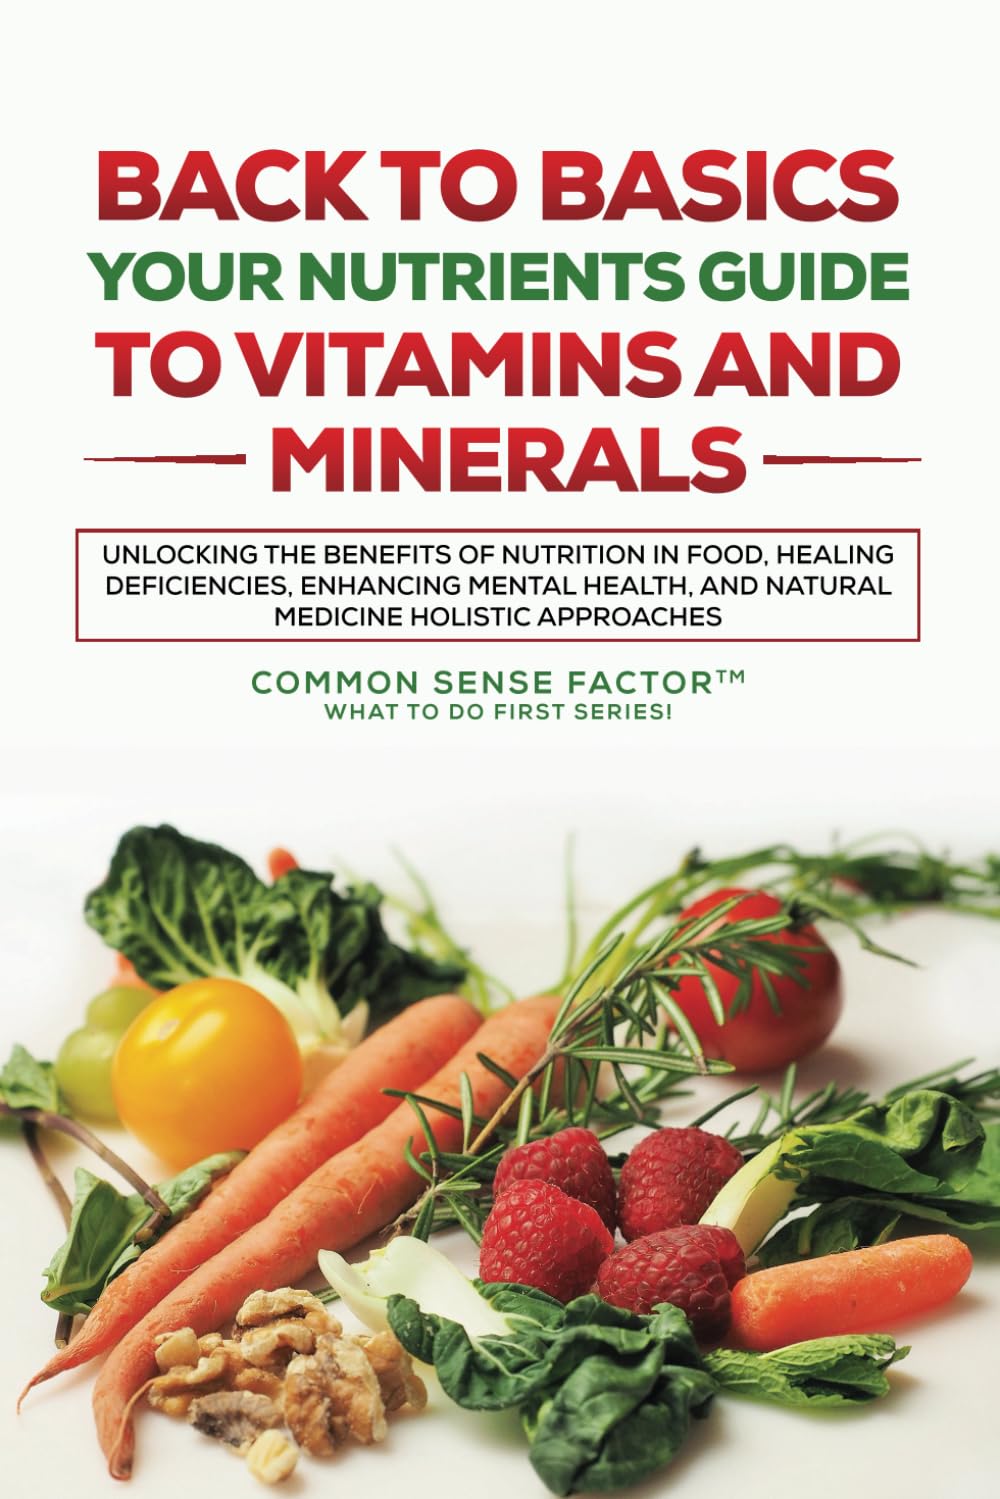 Nutrients Guide to Vitamins and Mineral...